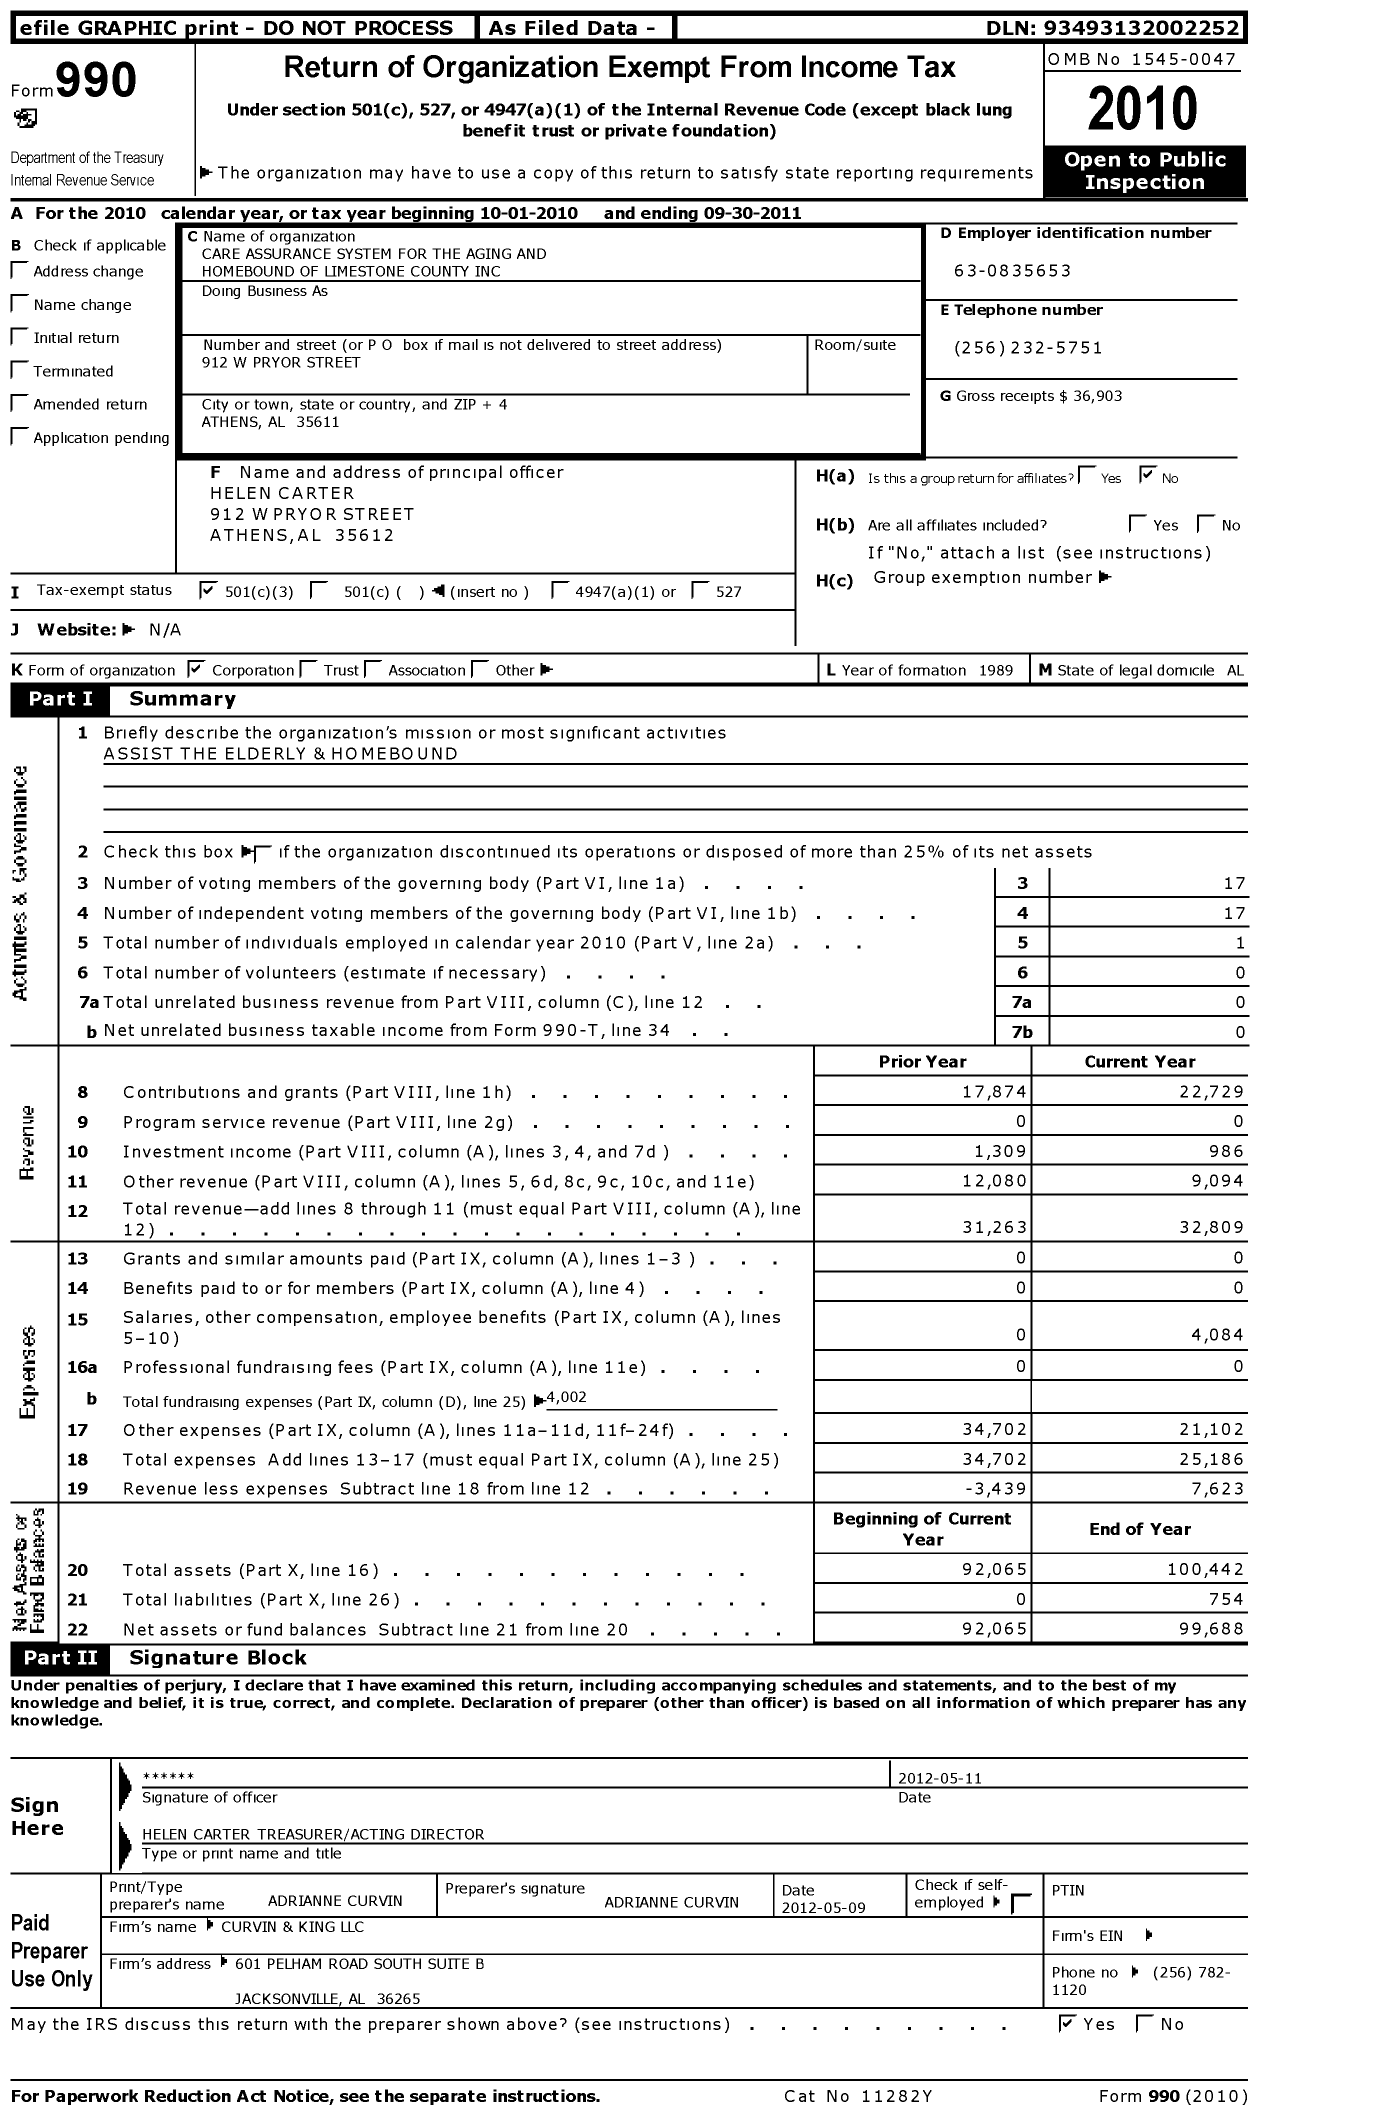 Image of first page of 2010 Form 990 for Care Assurance System for the Aging and Homebound